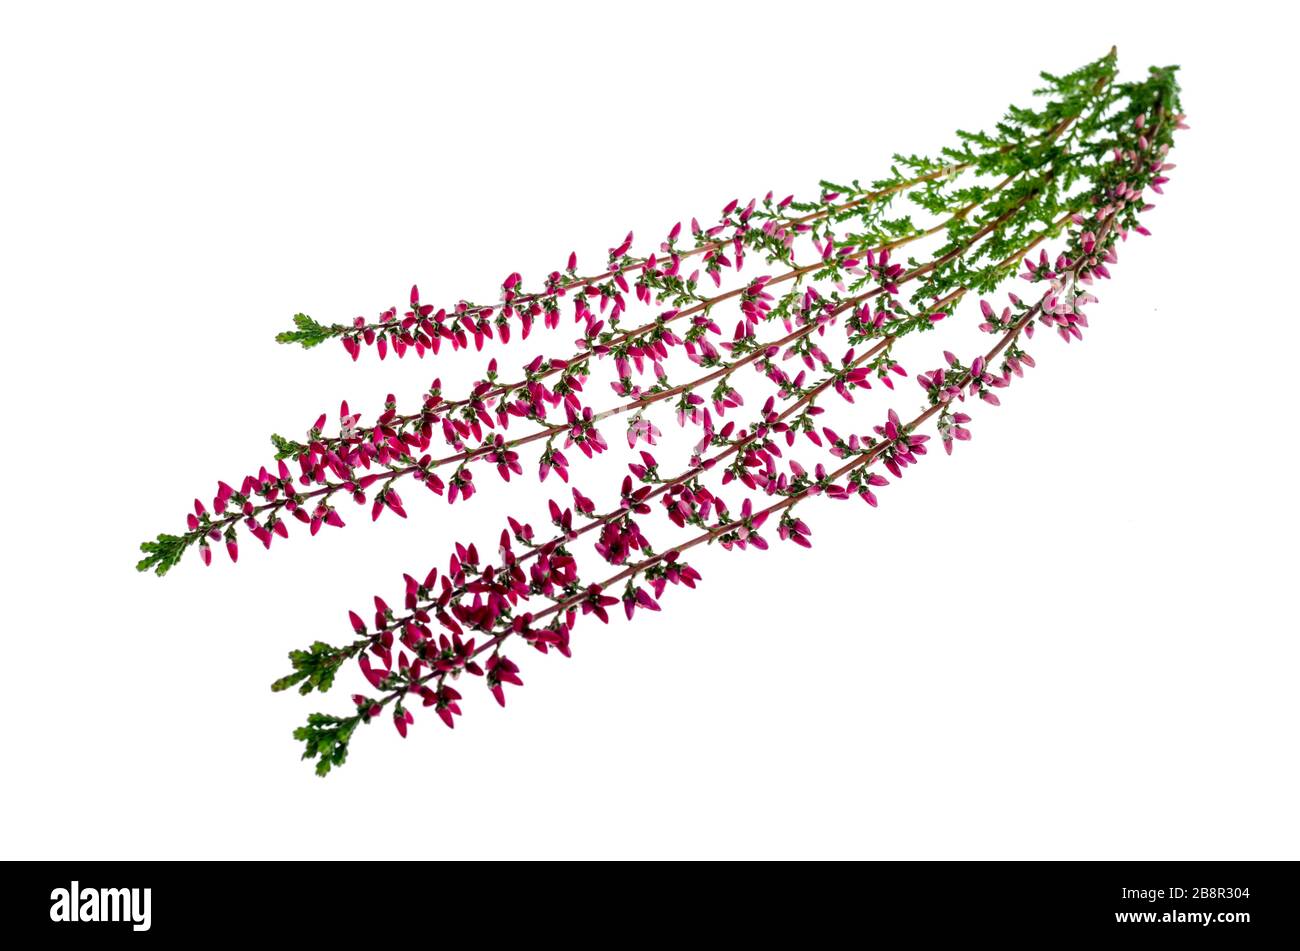 Blooming pink heather branches on white background. Studio Photo Stock Photo